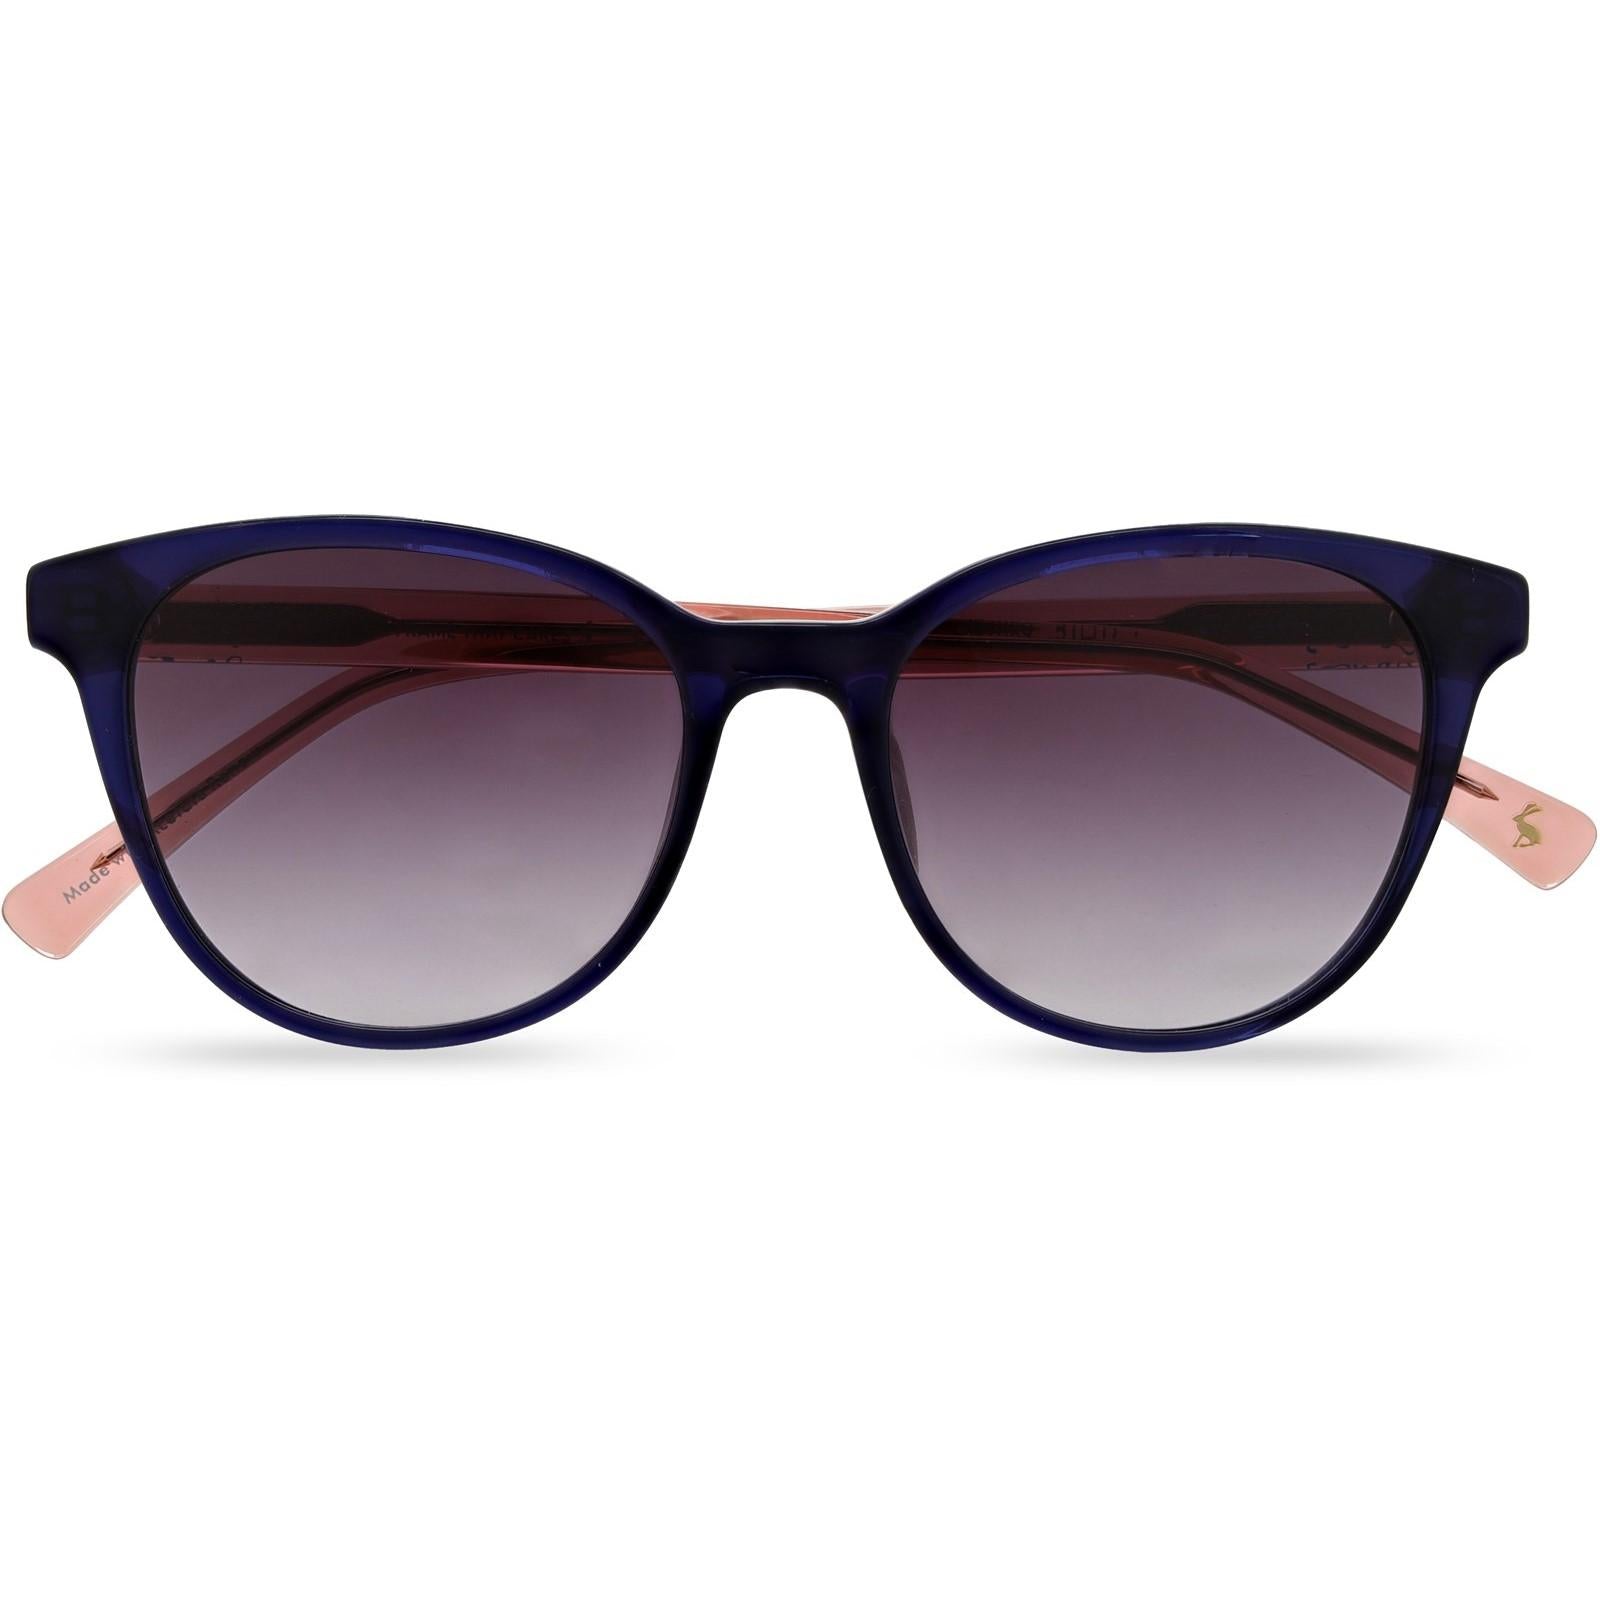 Joules JS7089 Bluebell Sunglasses Shoes